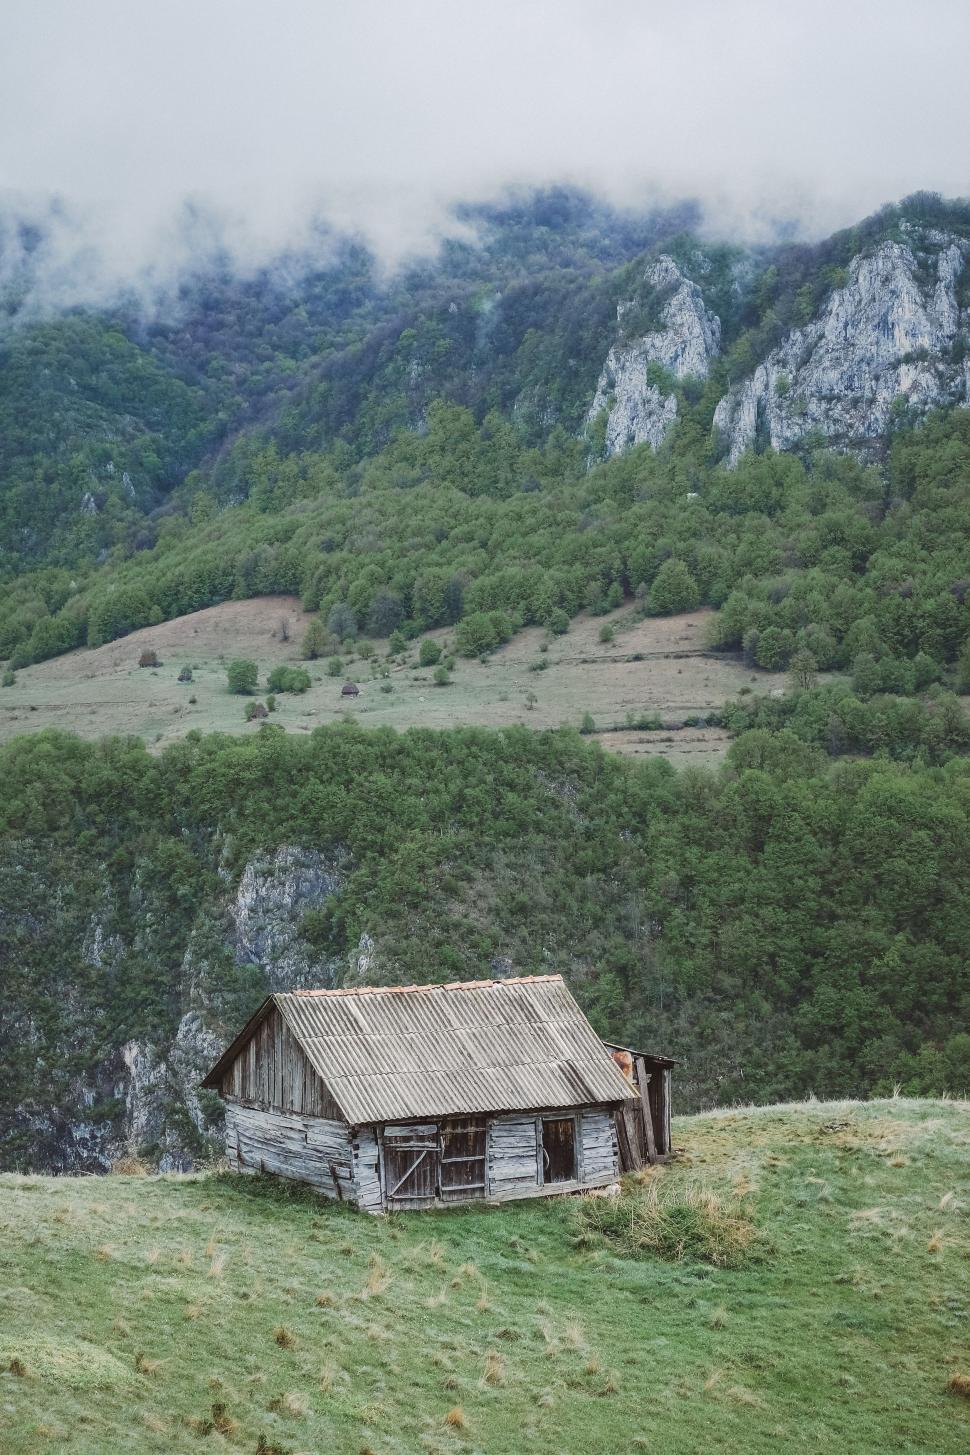 Free Image of Old Cabin in Field With Mountains 